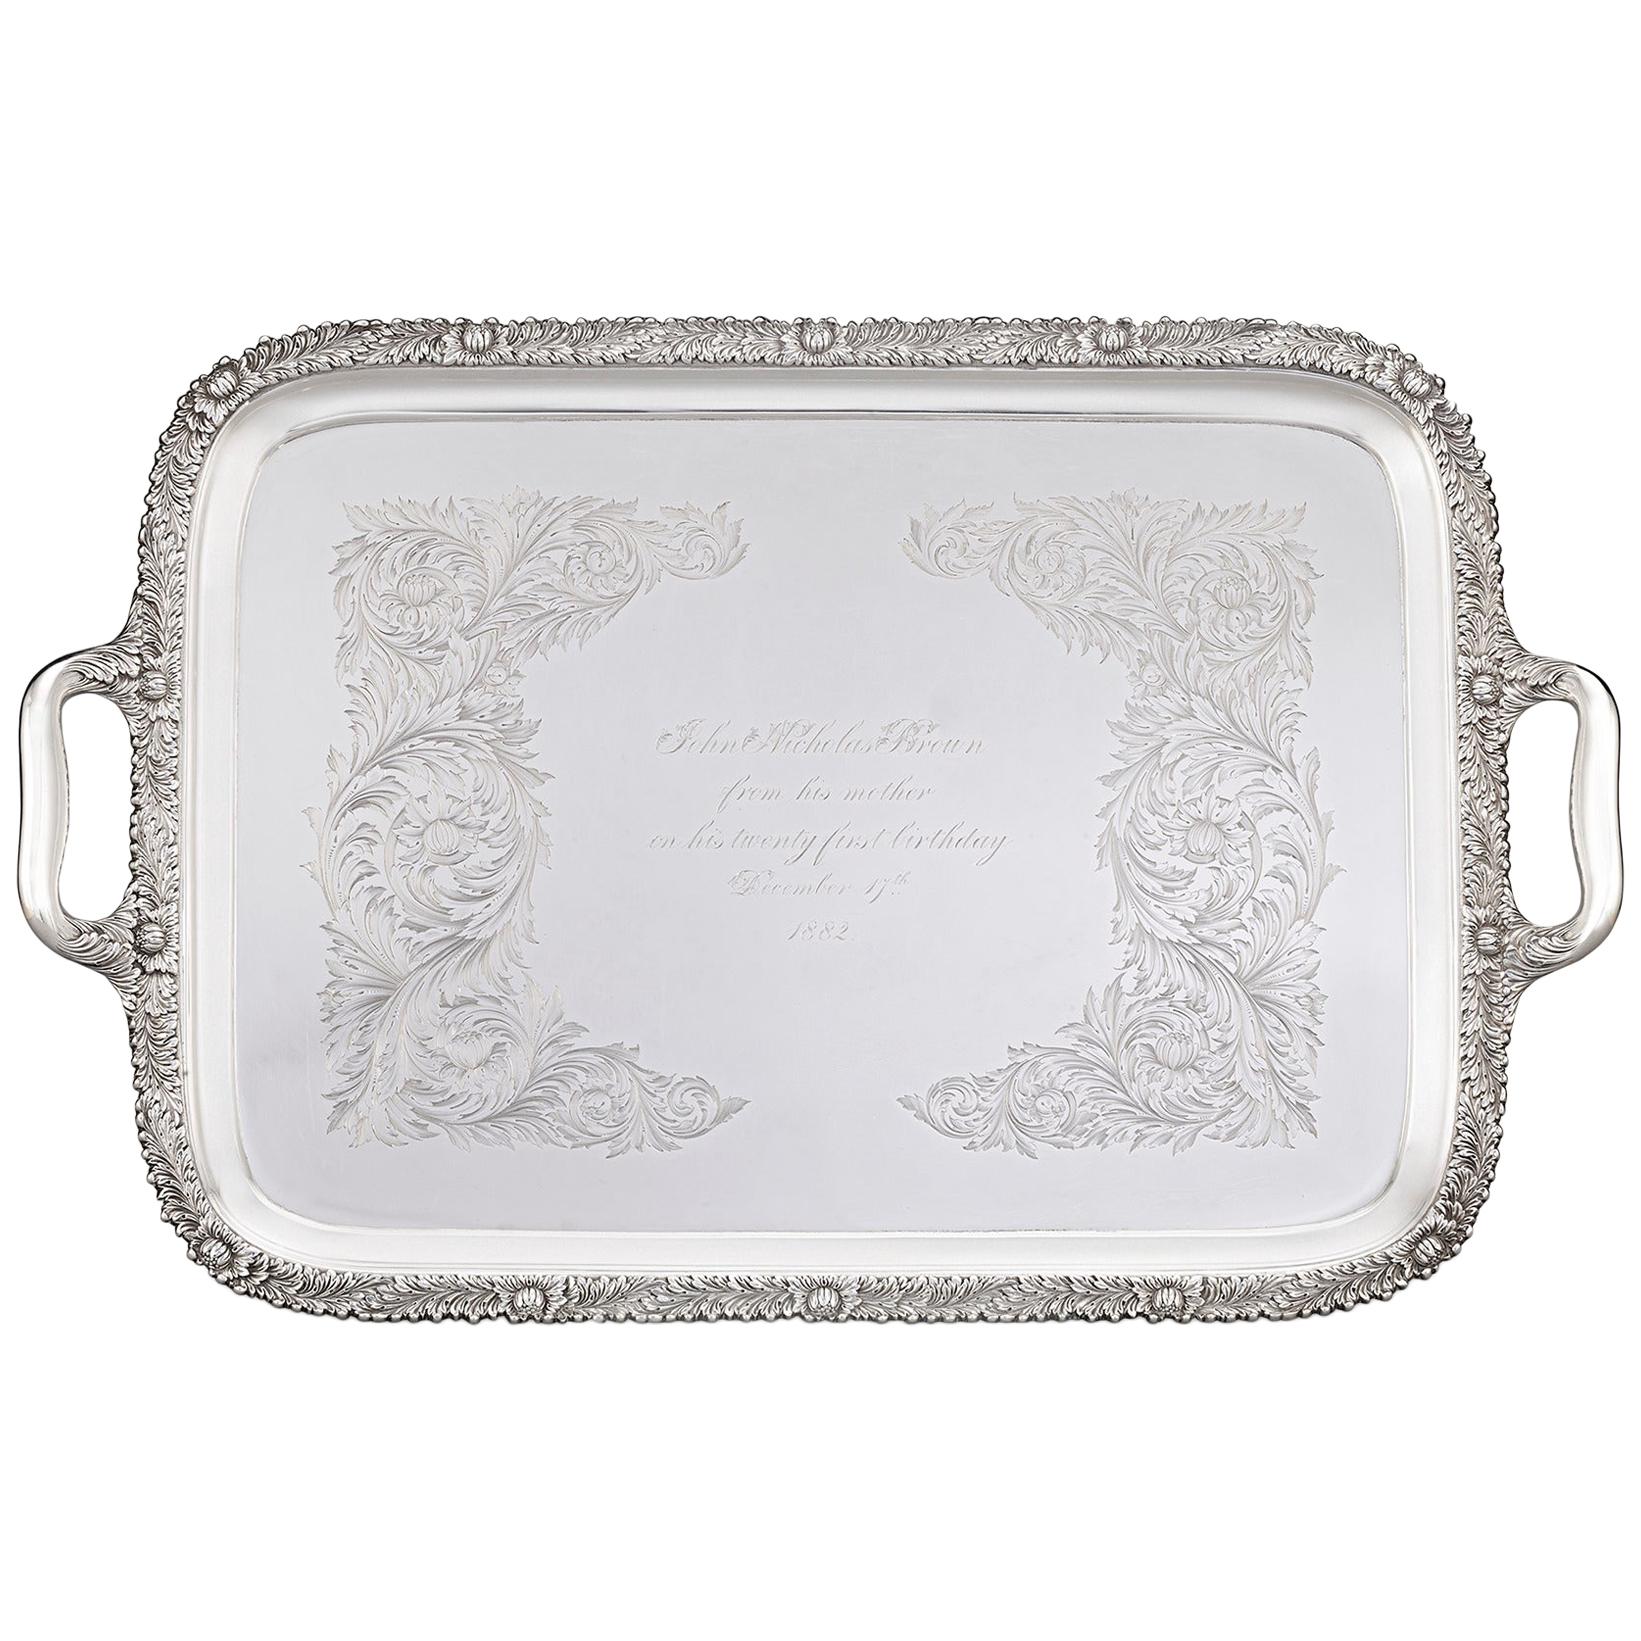 Chrysanthemum Sterling Silver Tea Tray by Tiffany & Co.